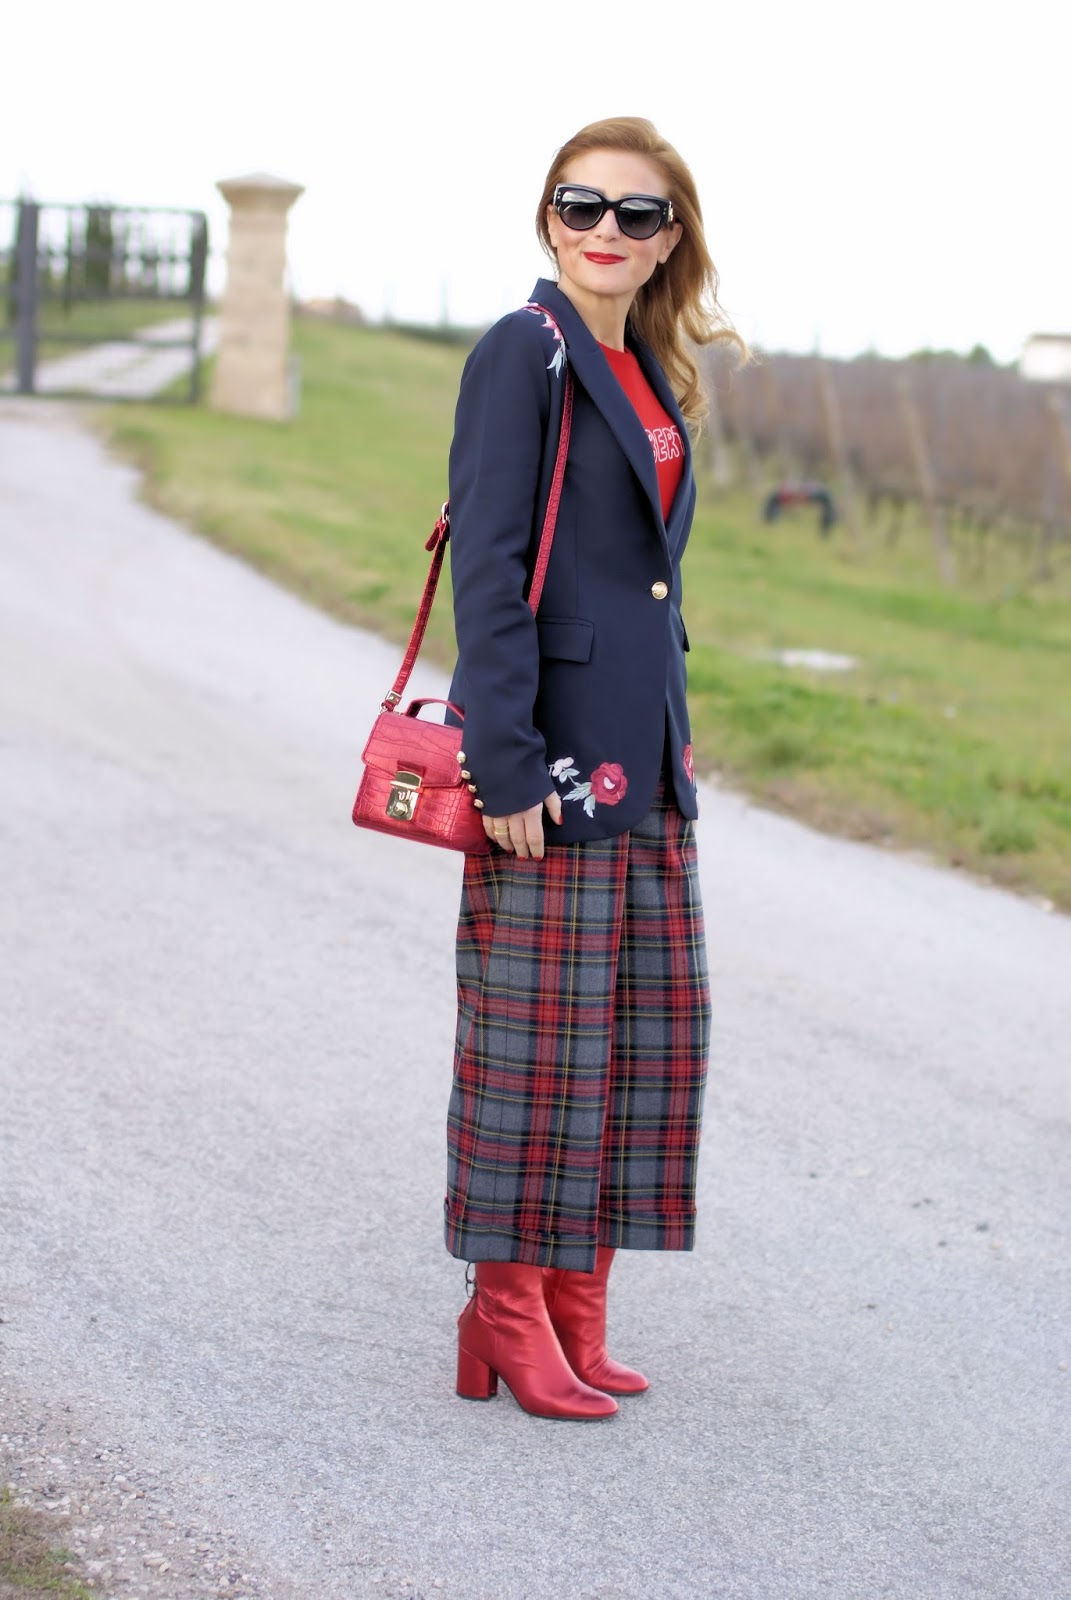 Zaful embroidered blazer and plaid pants on Fashion and Cookies fashion blog, fashion blogger style